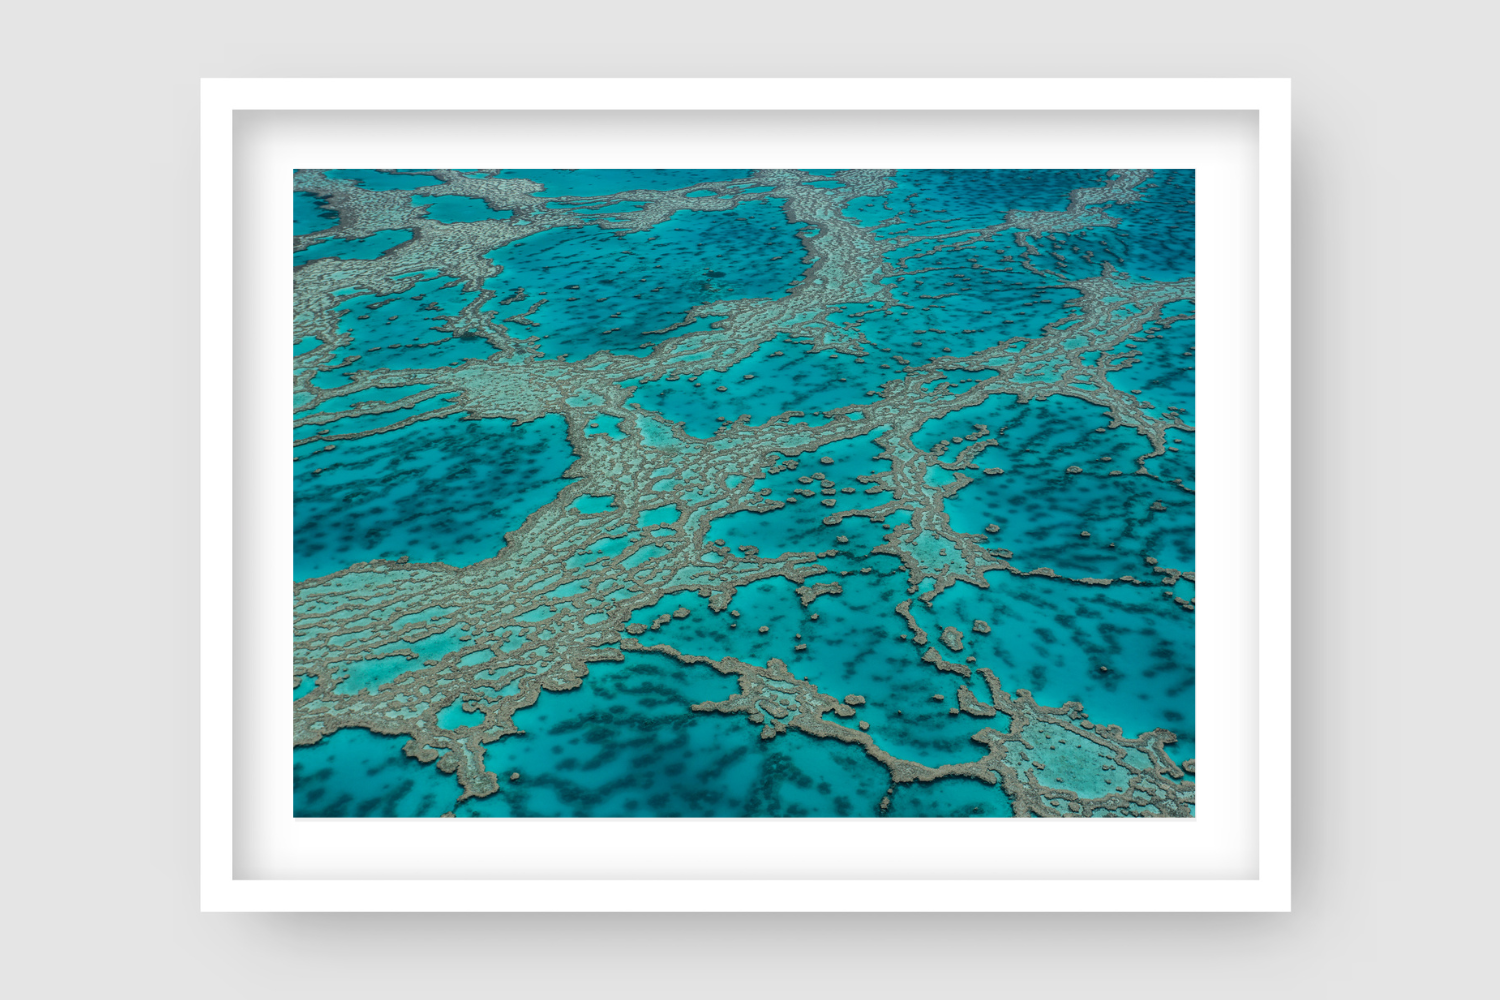 Coral reef veins spread across green, blue, aqua, turquise coloured water